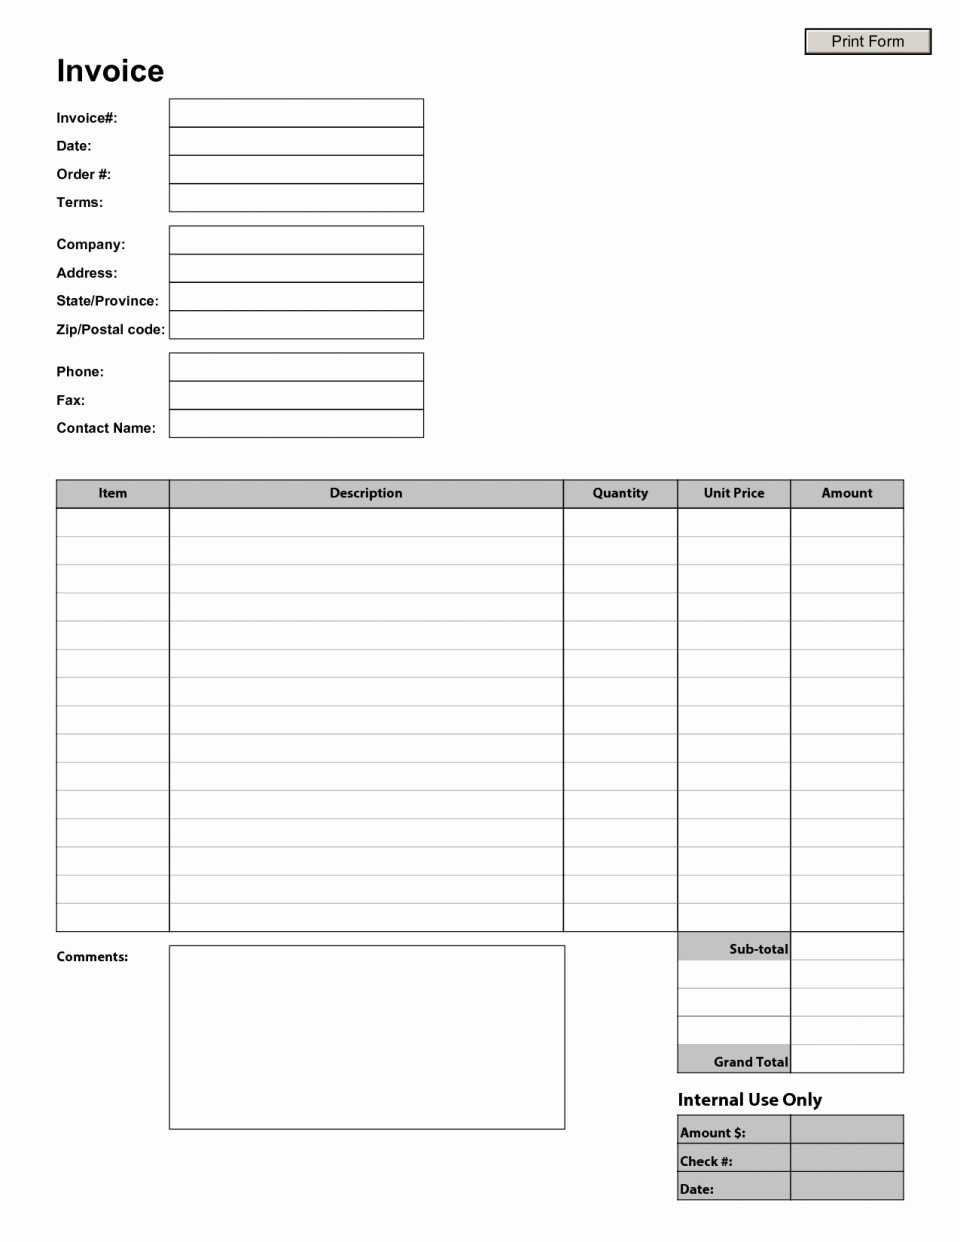 Event Planner Invoice Template Lovely Invoice Sample with Bank Details event Planner Template